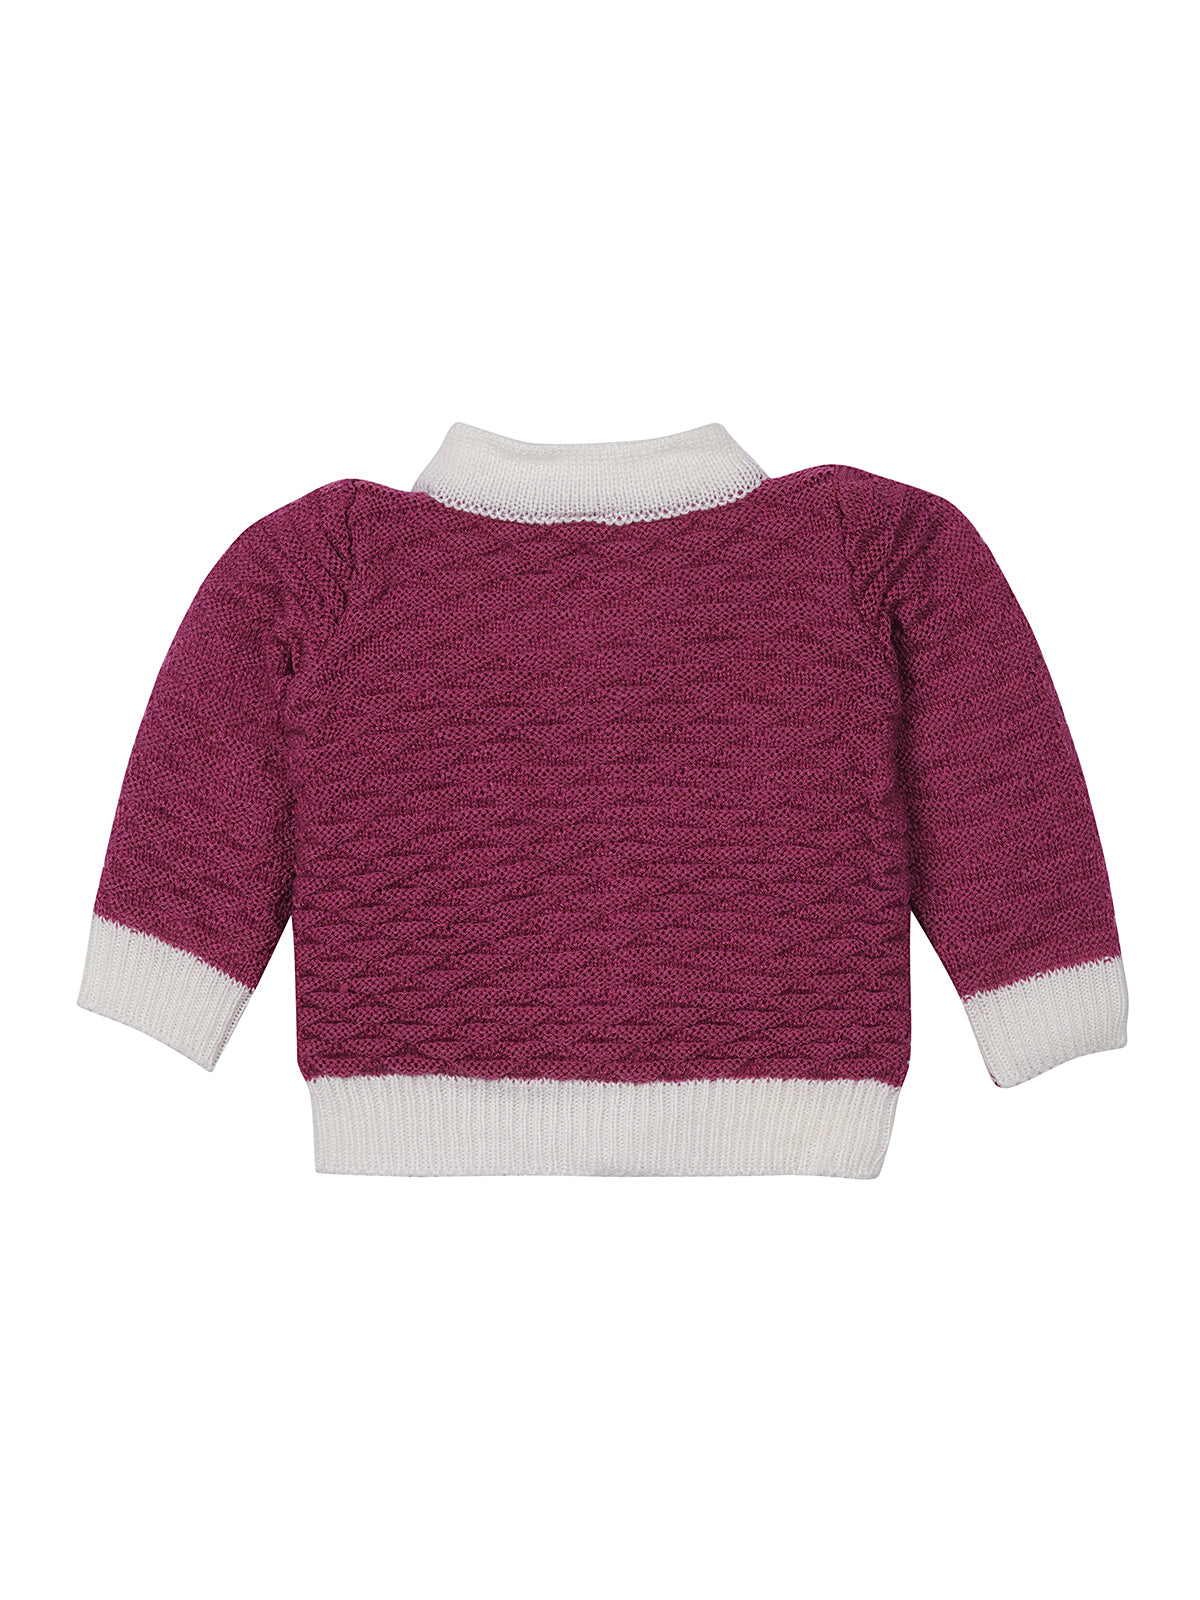 Front Open Wine Color Self Design Sweater with Cap and Pair of Socks